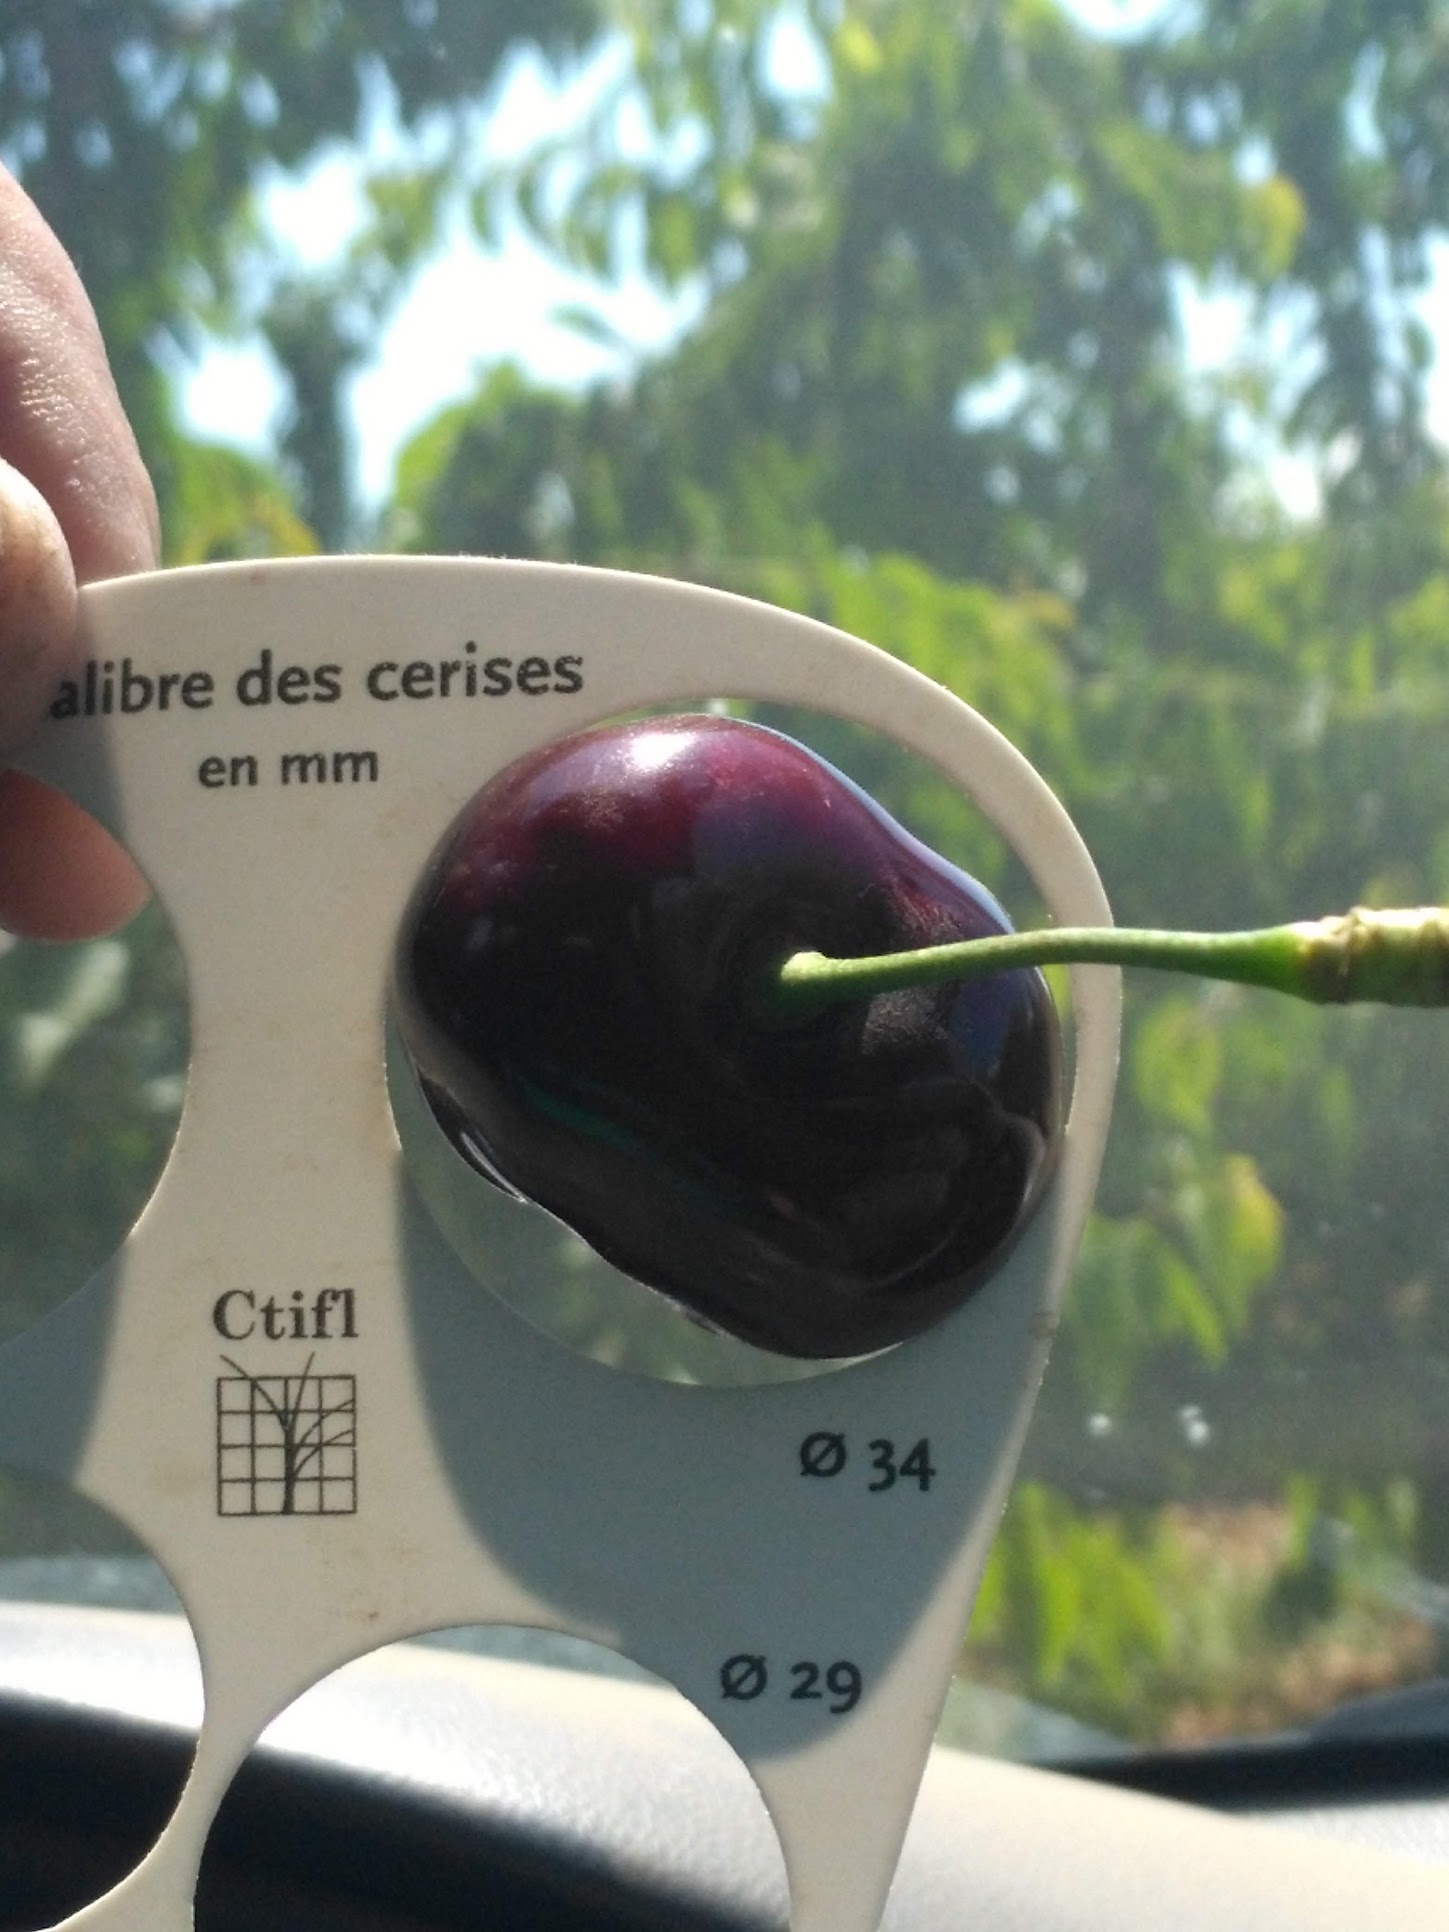 a flat plastic stencil/tool specific to measuring cherries. there are partly visible holes on the tool and the holes read 34 and 30 on two of them. on top of the tool reads “alibre des cerises en mm” and a company logo with the letters Ctifl. there is a single cherry inserted in a whole measuring 34 mm and the cherry fits in perfectly.